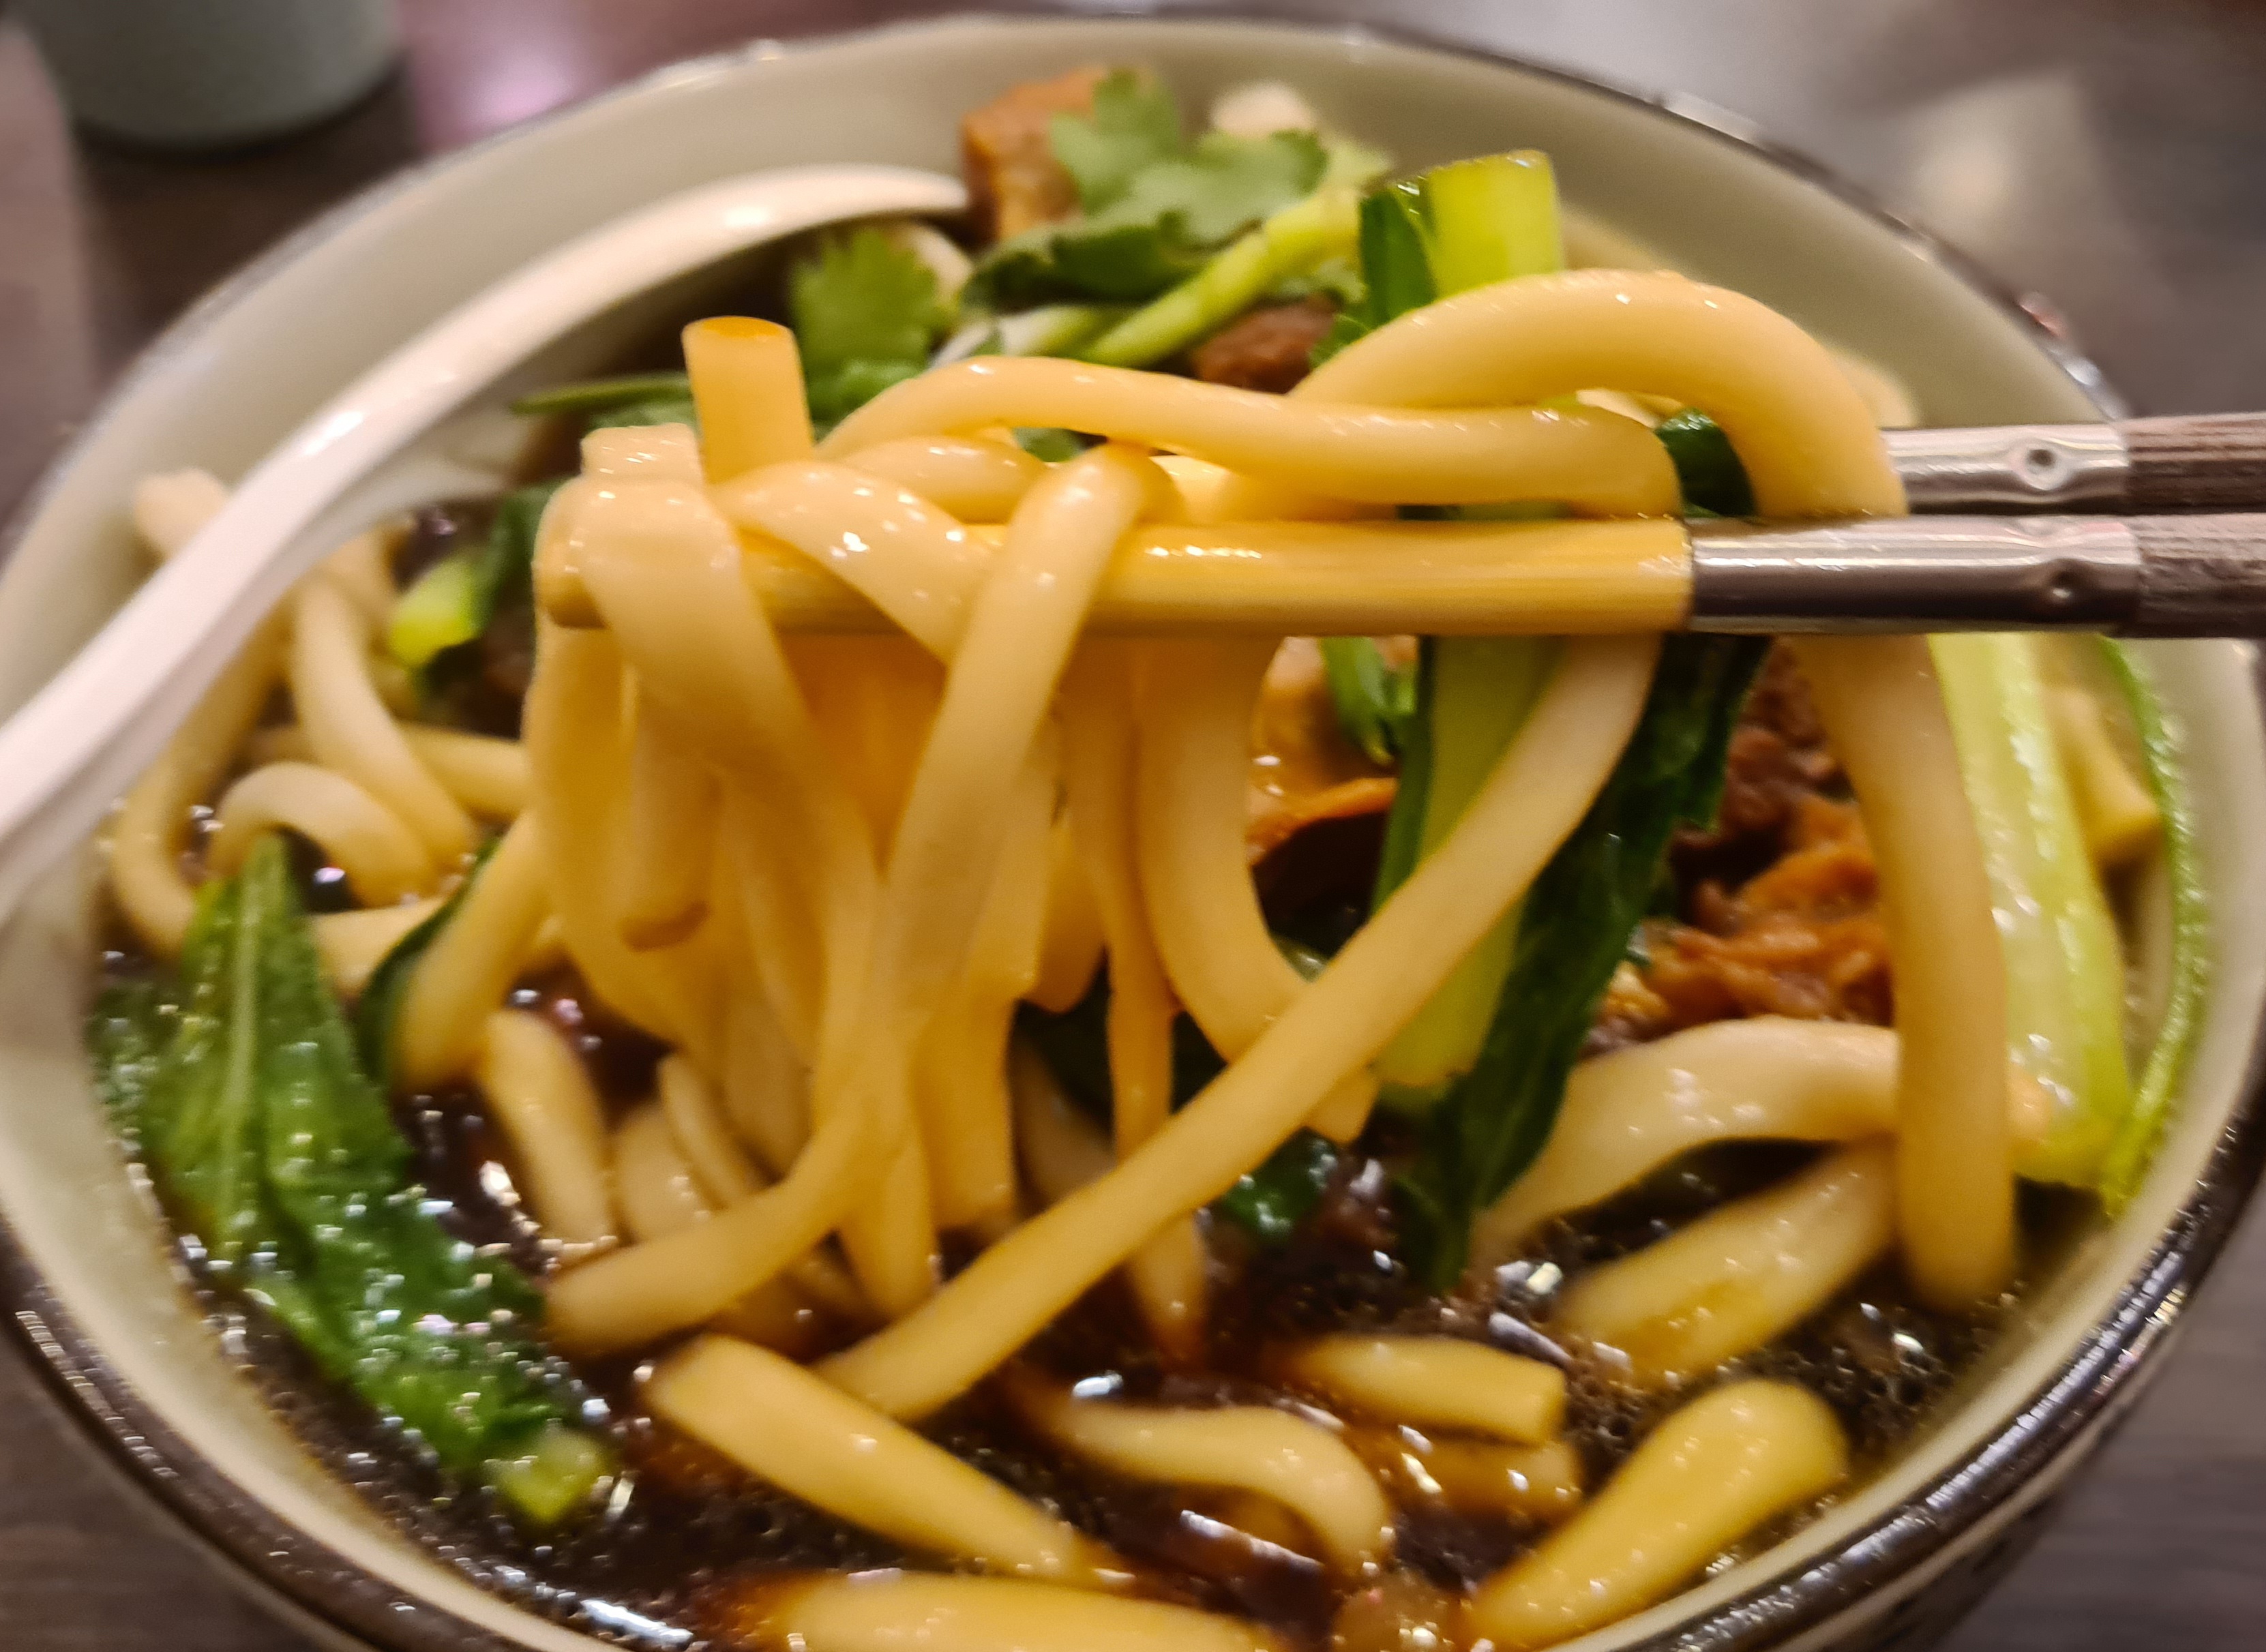 Thick Hand Pulled Noodles at Swanky Noodle Restaurant Parramatta